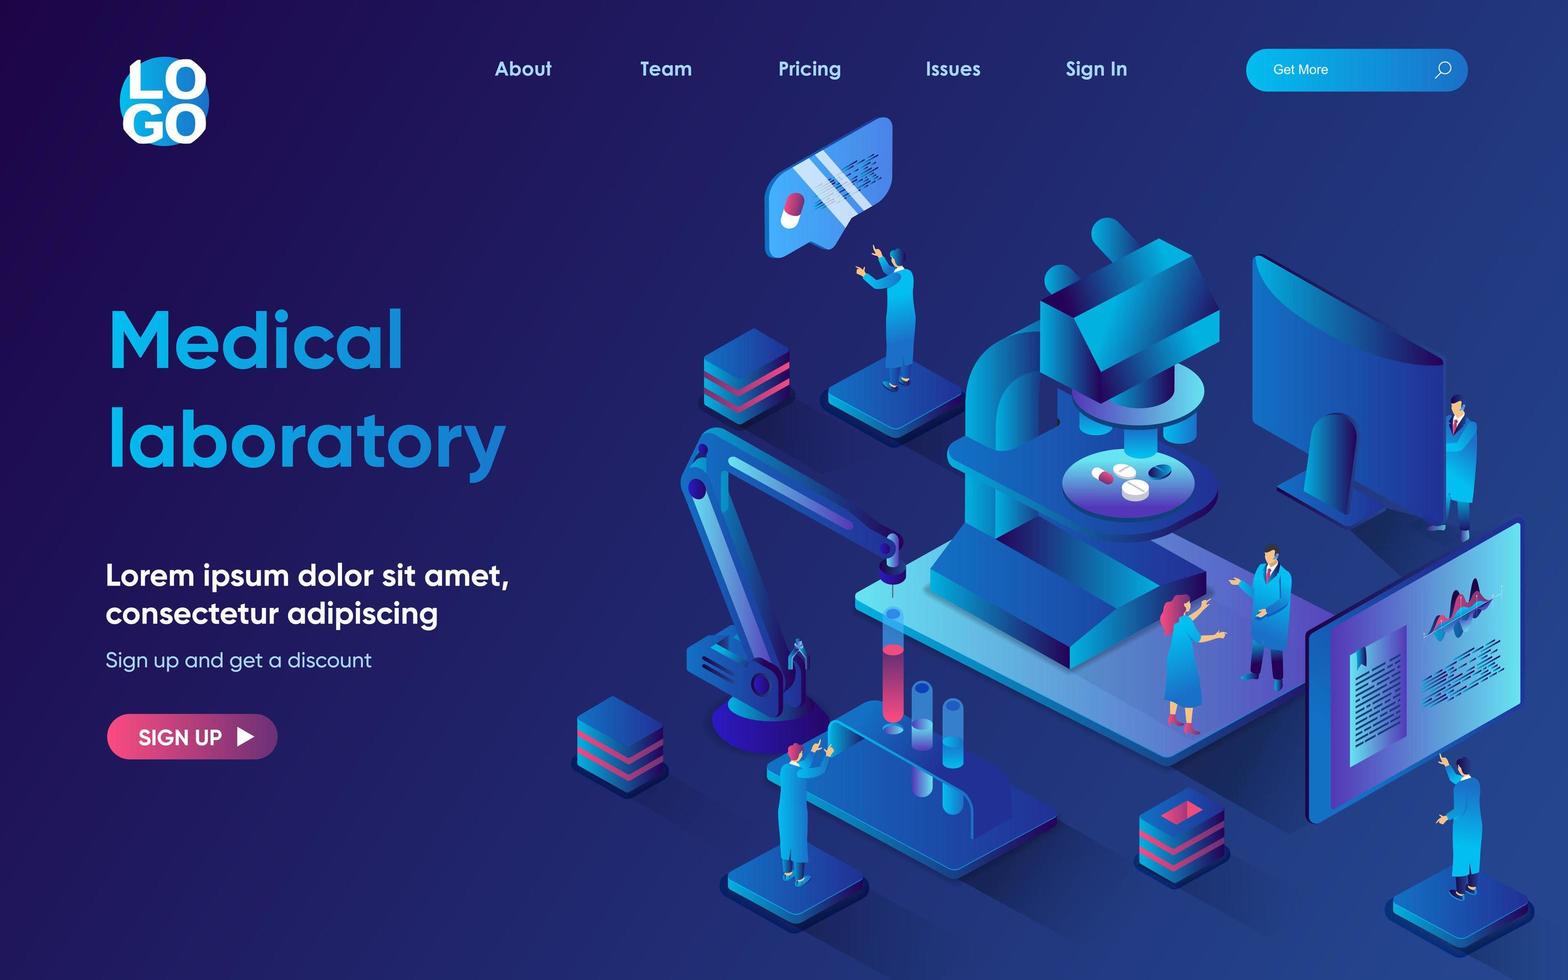 Medical laboratory concept isometric landing page. Team of scientists develops medicines, does medical research in lab, 3d web banner template. Vector illustration with people scene in flat design